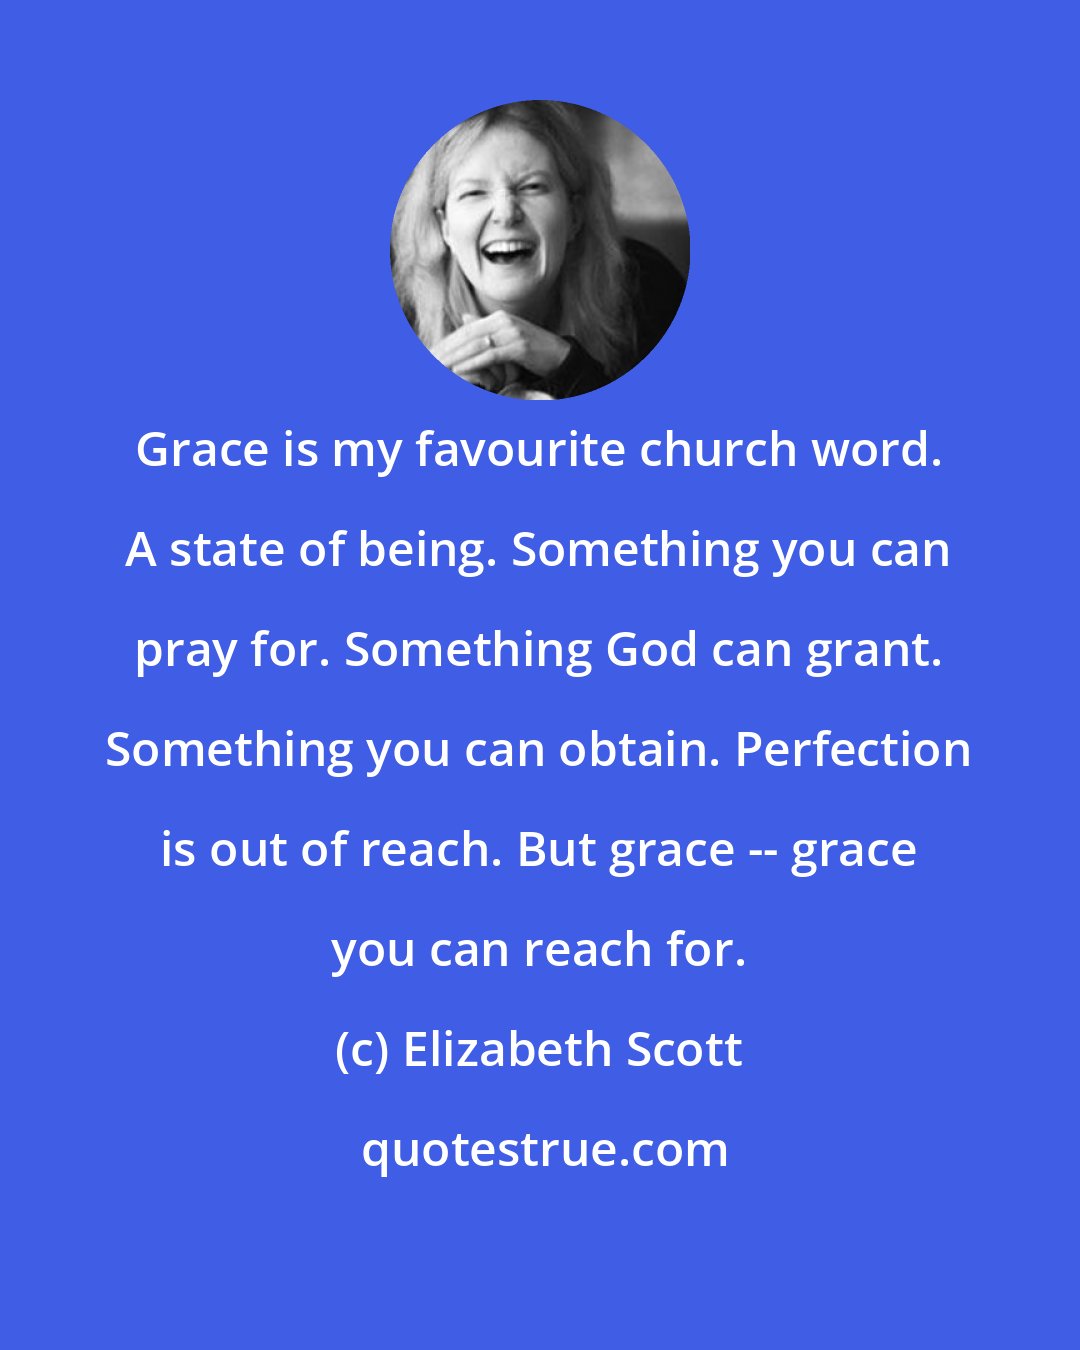 Elizabeth Scott: Grace is my favourite church word. A state of being. Something you can pray for. Something God can grant. Something you can obtain. Perfection is out of reach. But grace -- grace you can reach for.